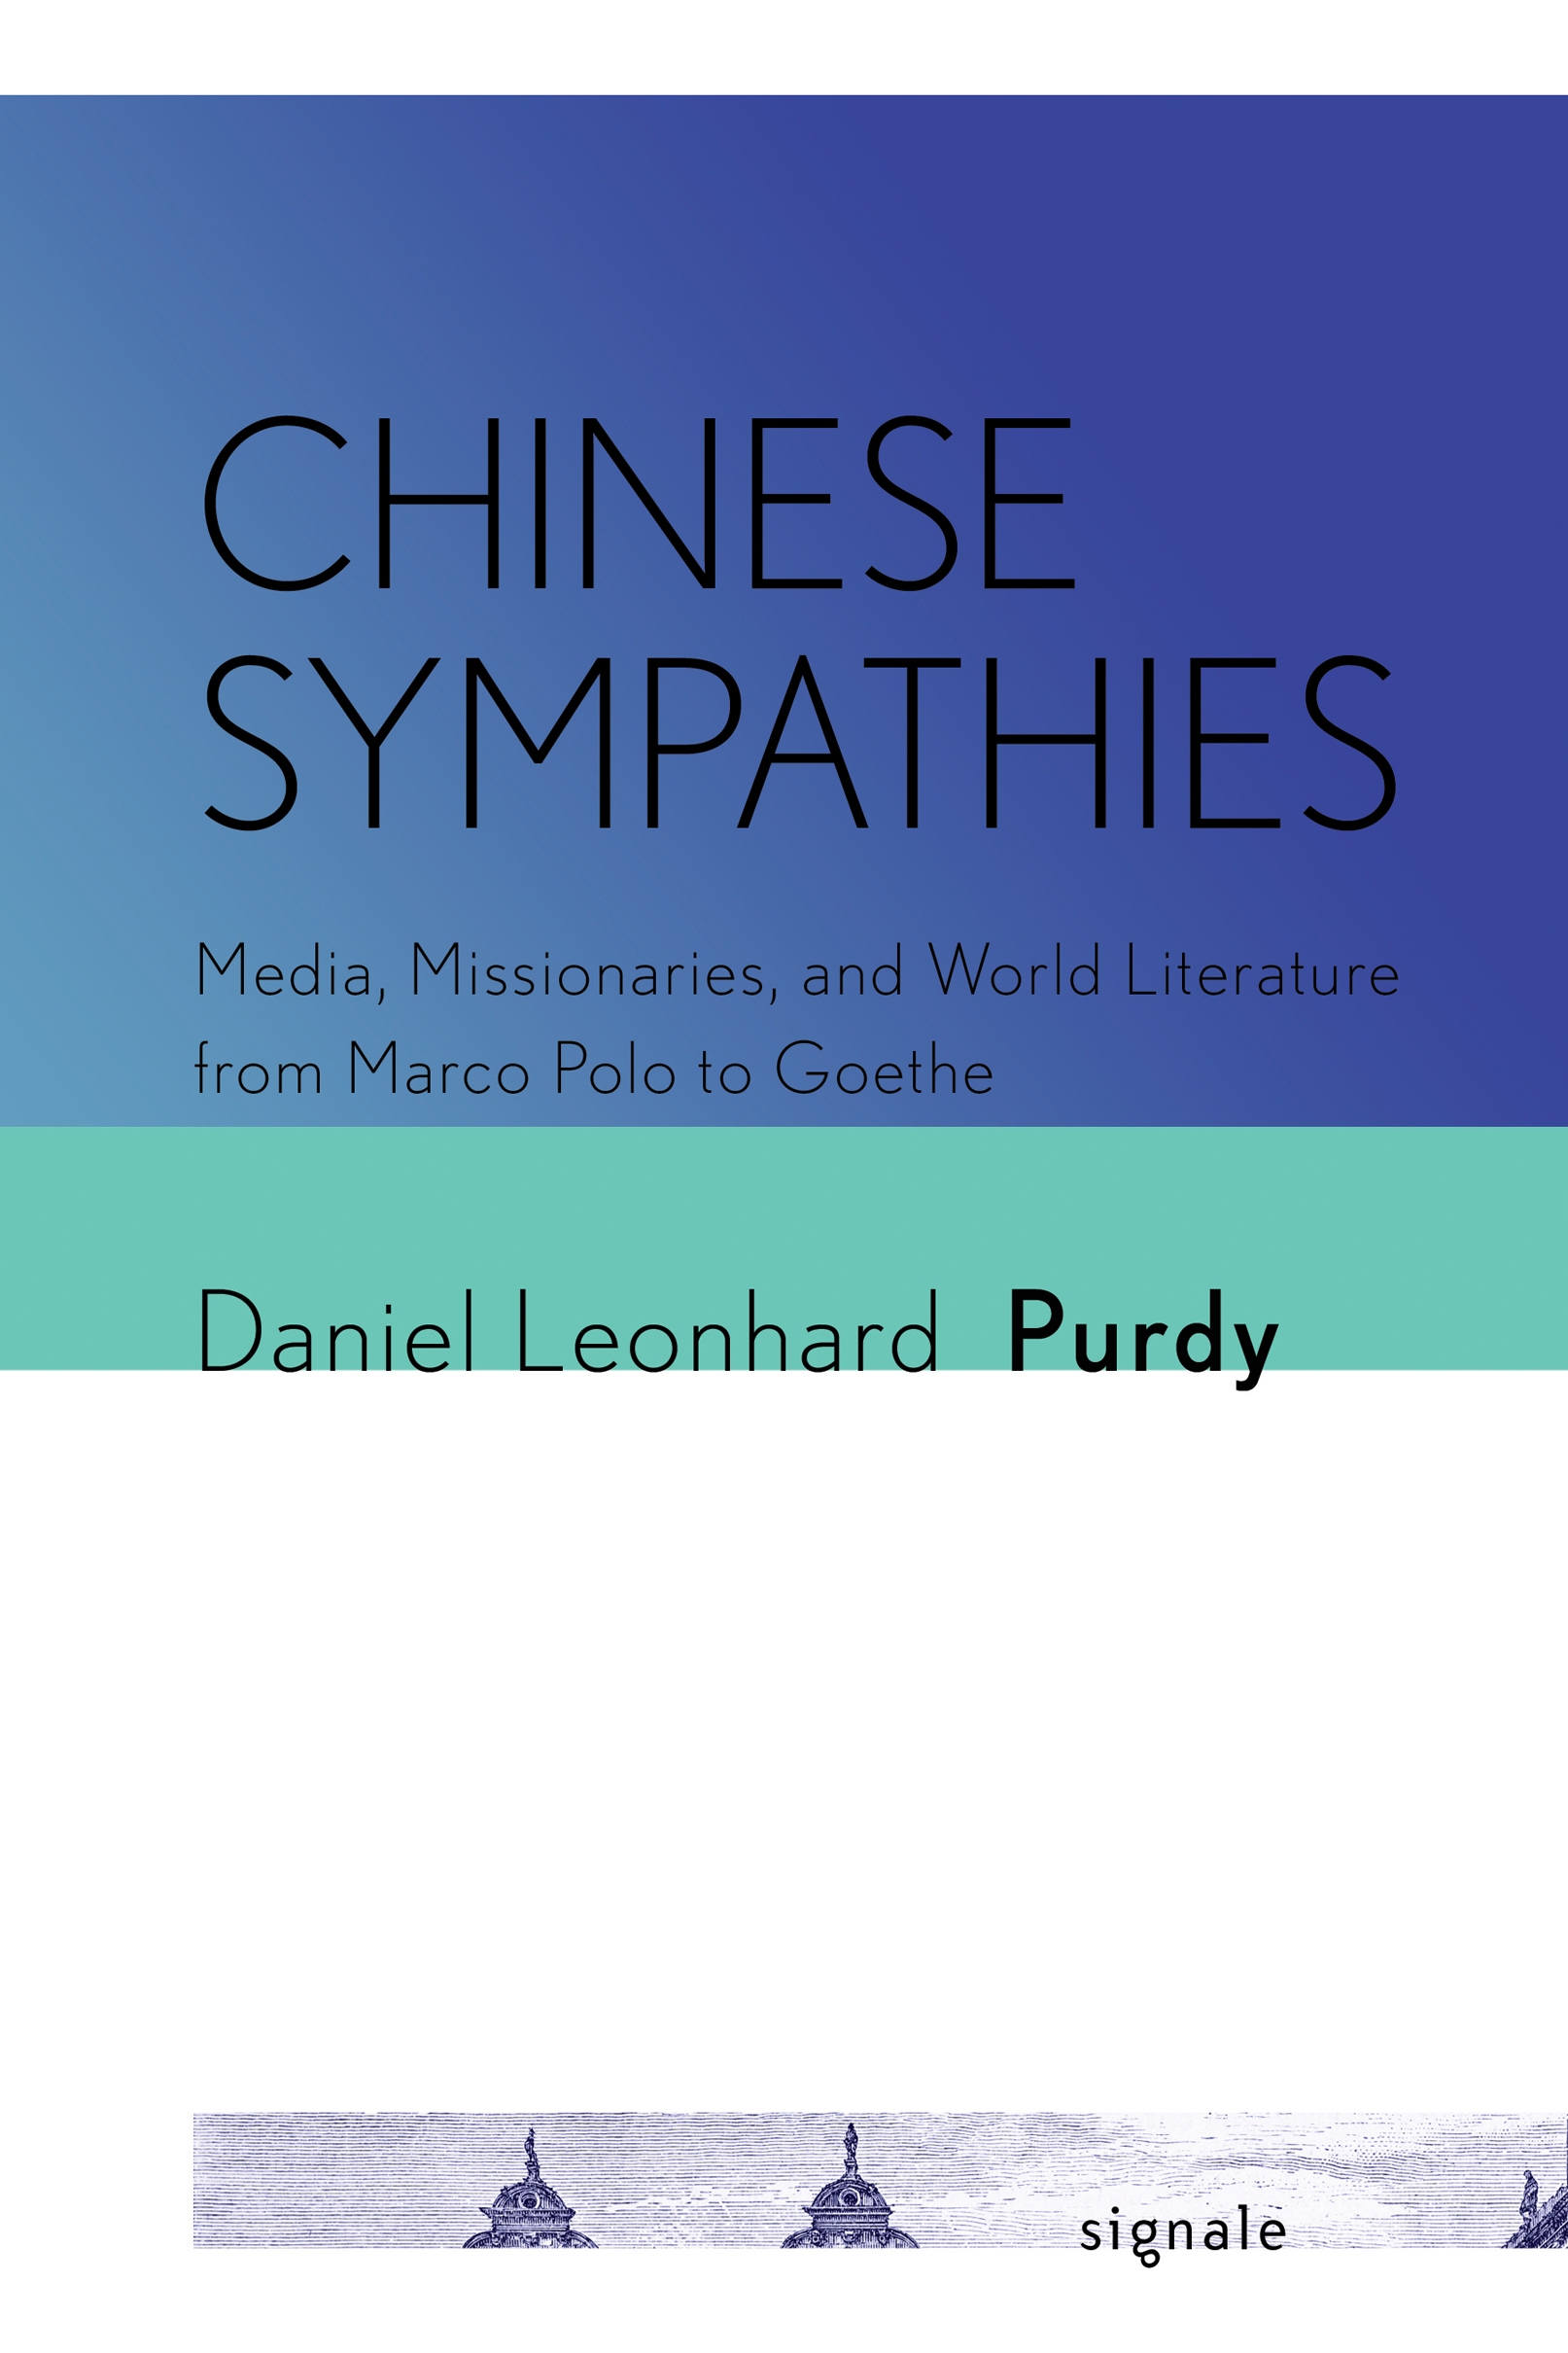 Chinese Sympathies: Media, Missionaries, World Literature from Marco Polo to Goethe